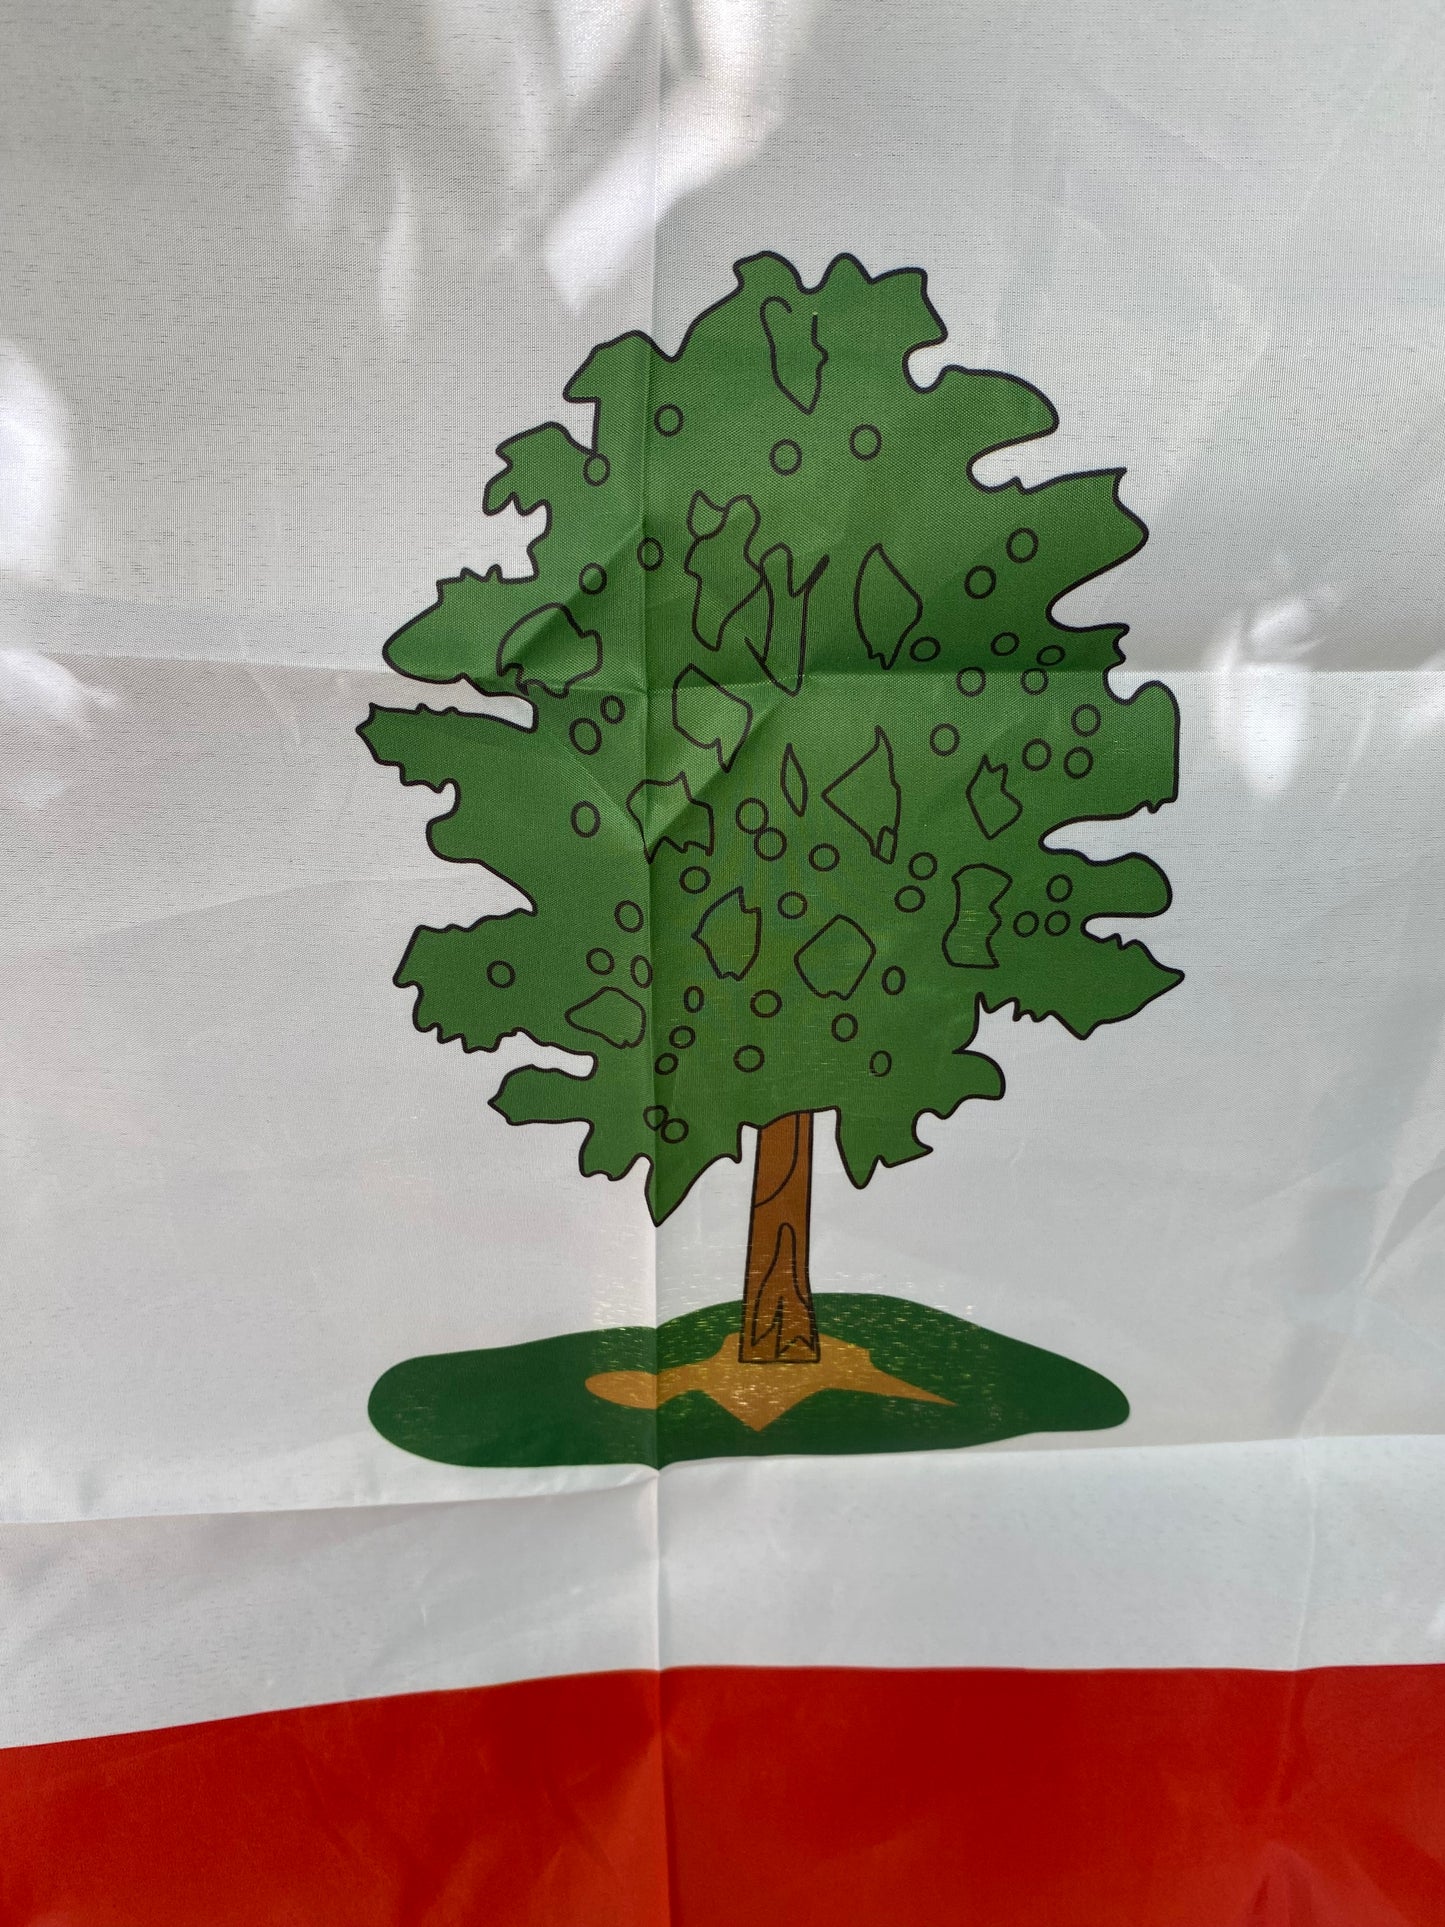 Republic of Mississippi House Flag - Booneville Example